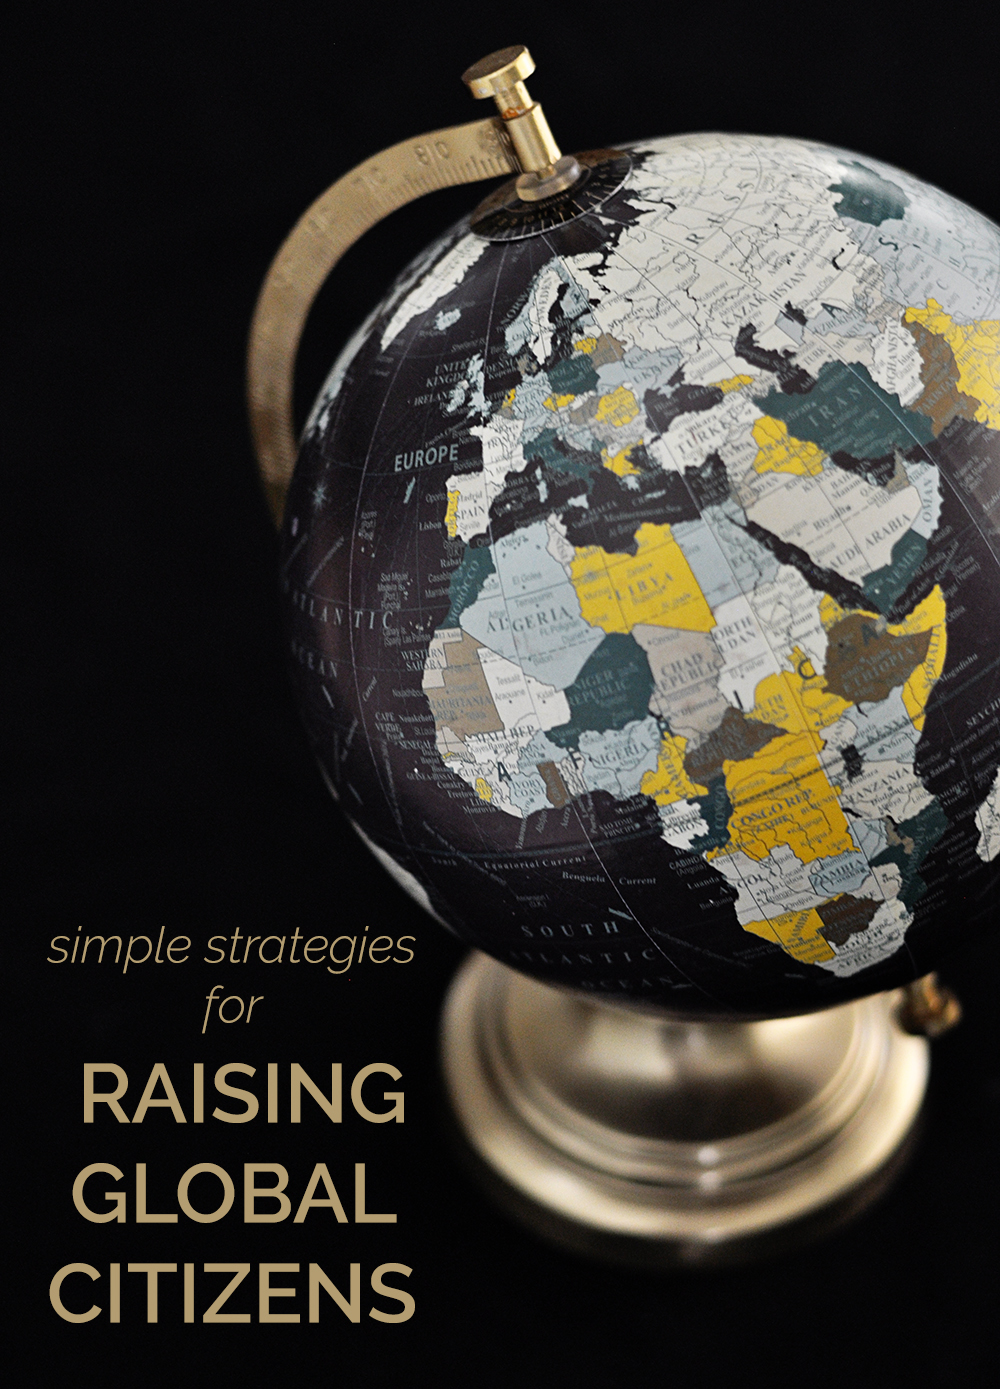 Simple strategies for raising global citizens with Emergen-C